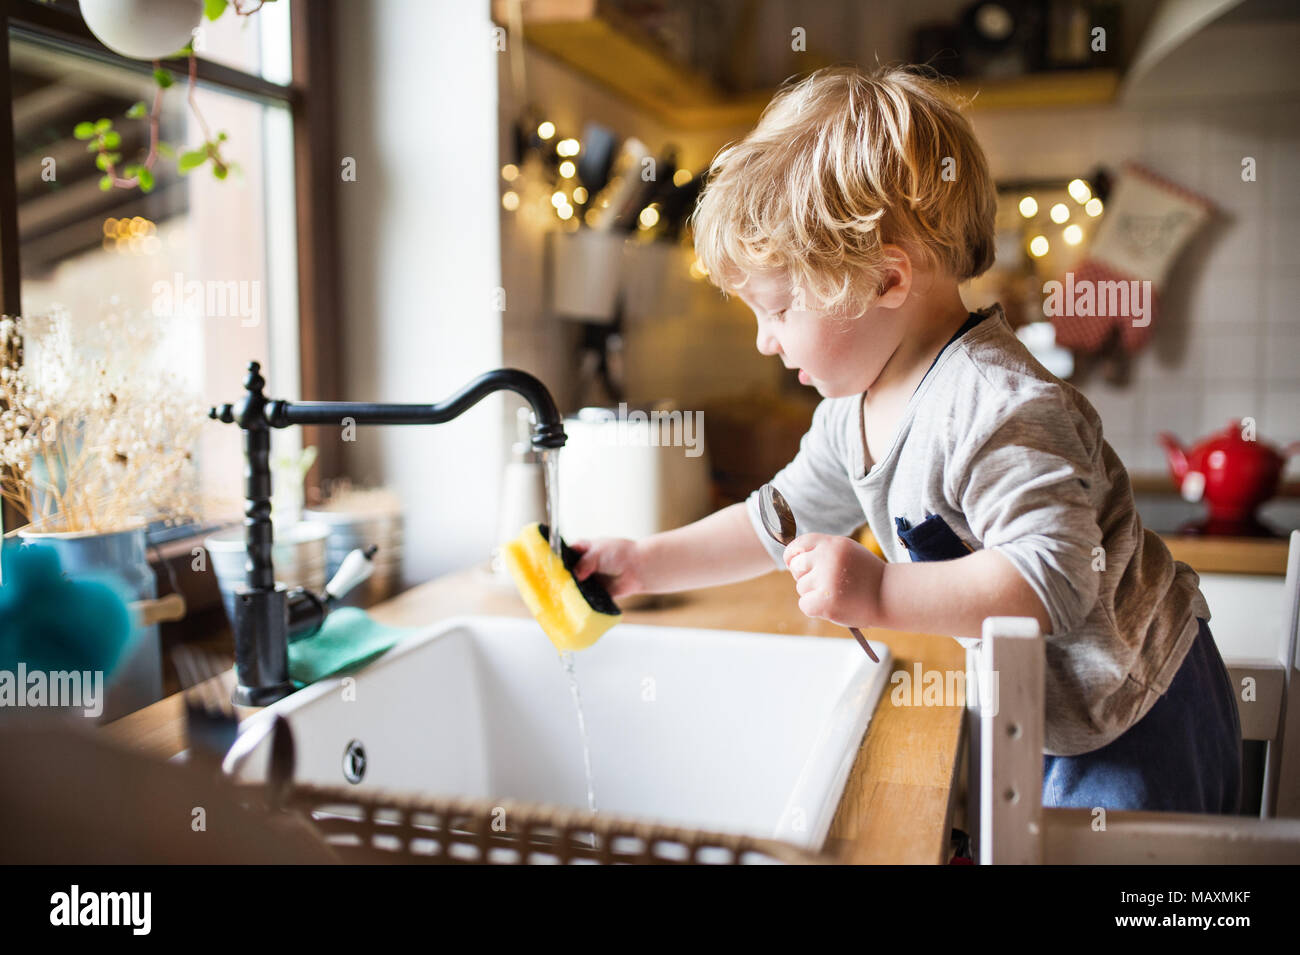 A toddler boy washing up the dishes. Stock Photo